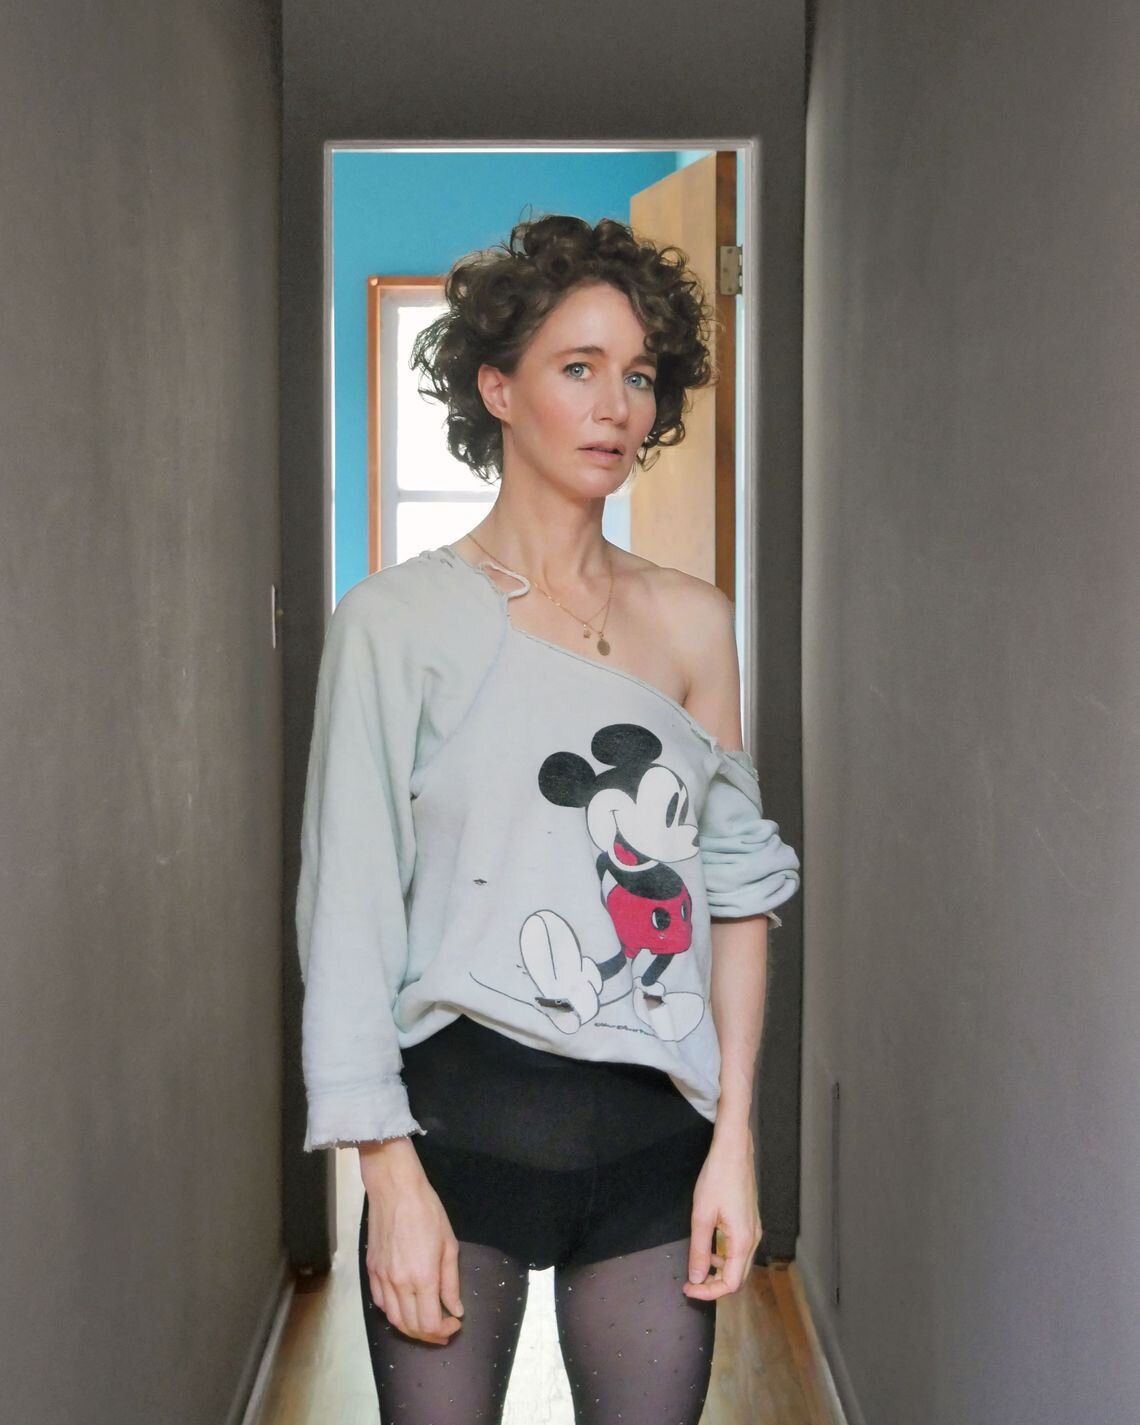   Mike Mills  photographed Miranda July for her profile in New York Magazine in August 2020.   Watch the video short  here .  